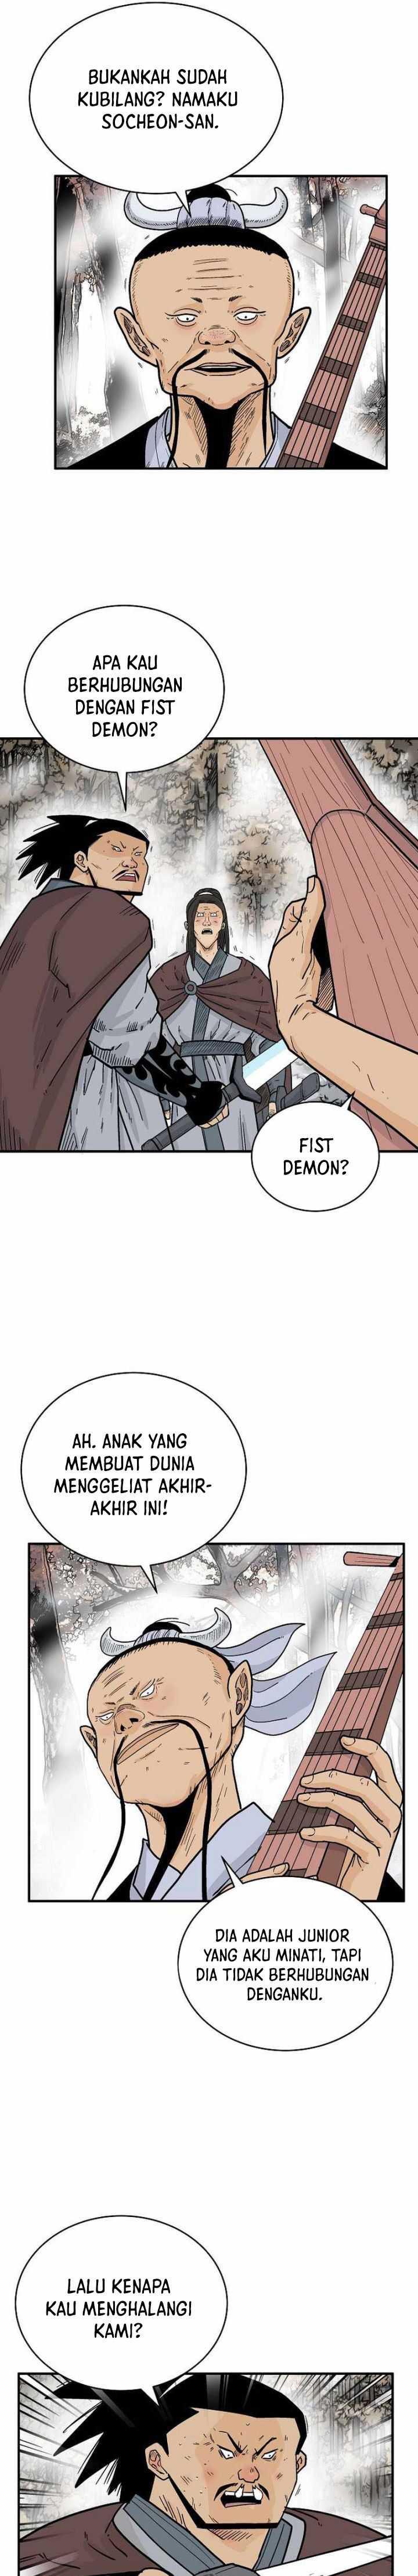 Fist Demon Of Mount Hua Chapter 121